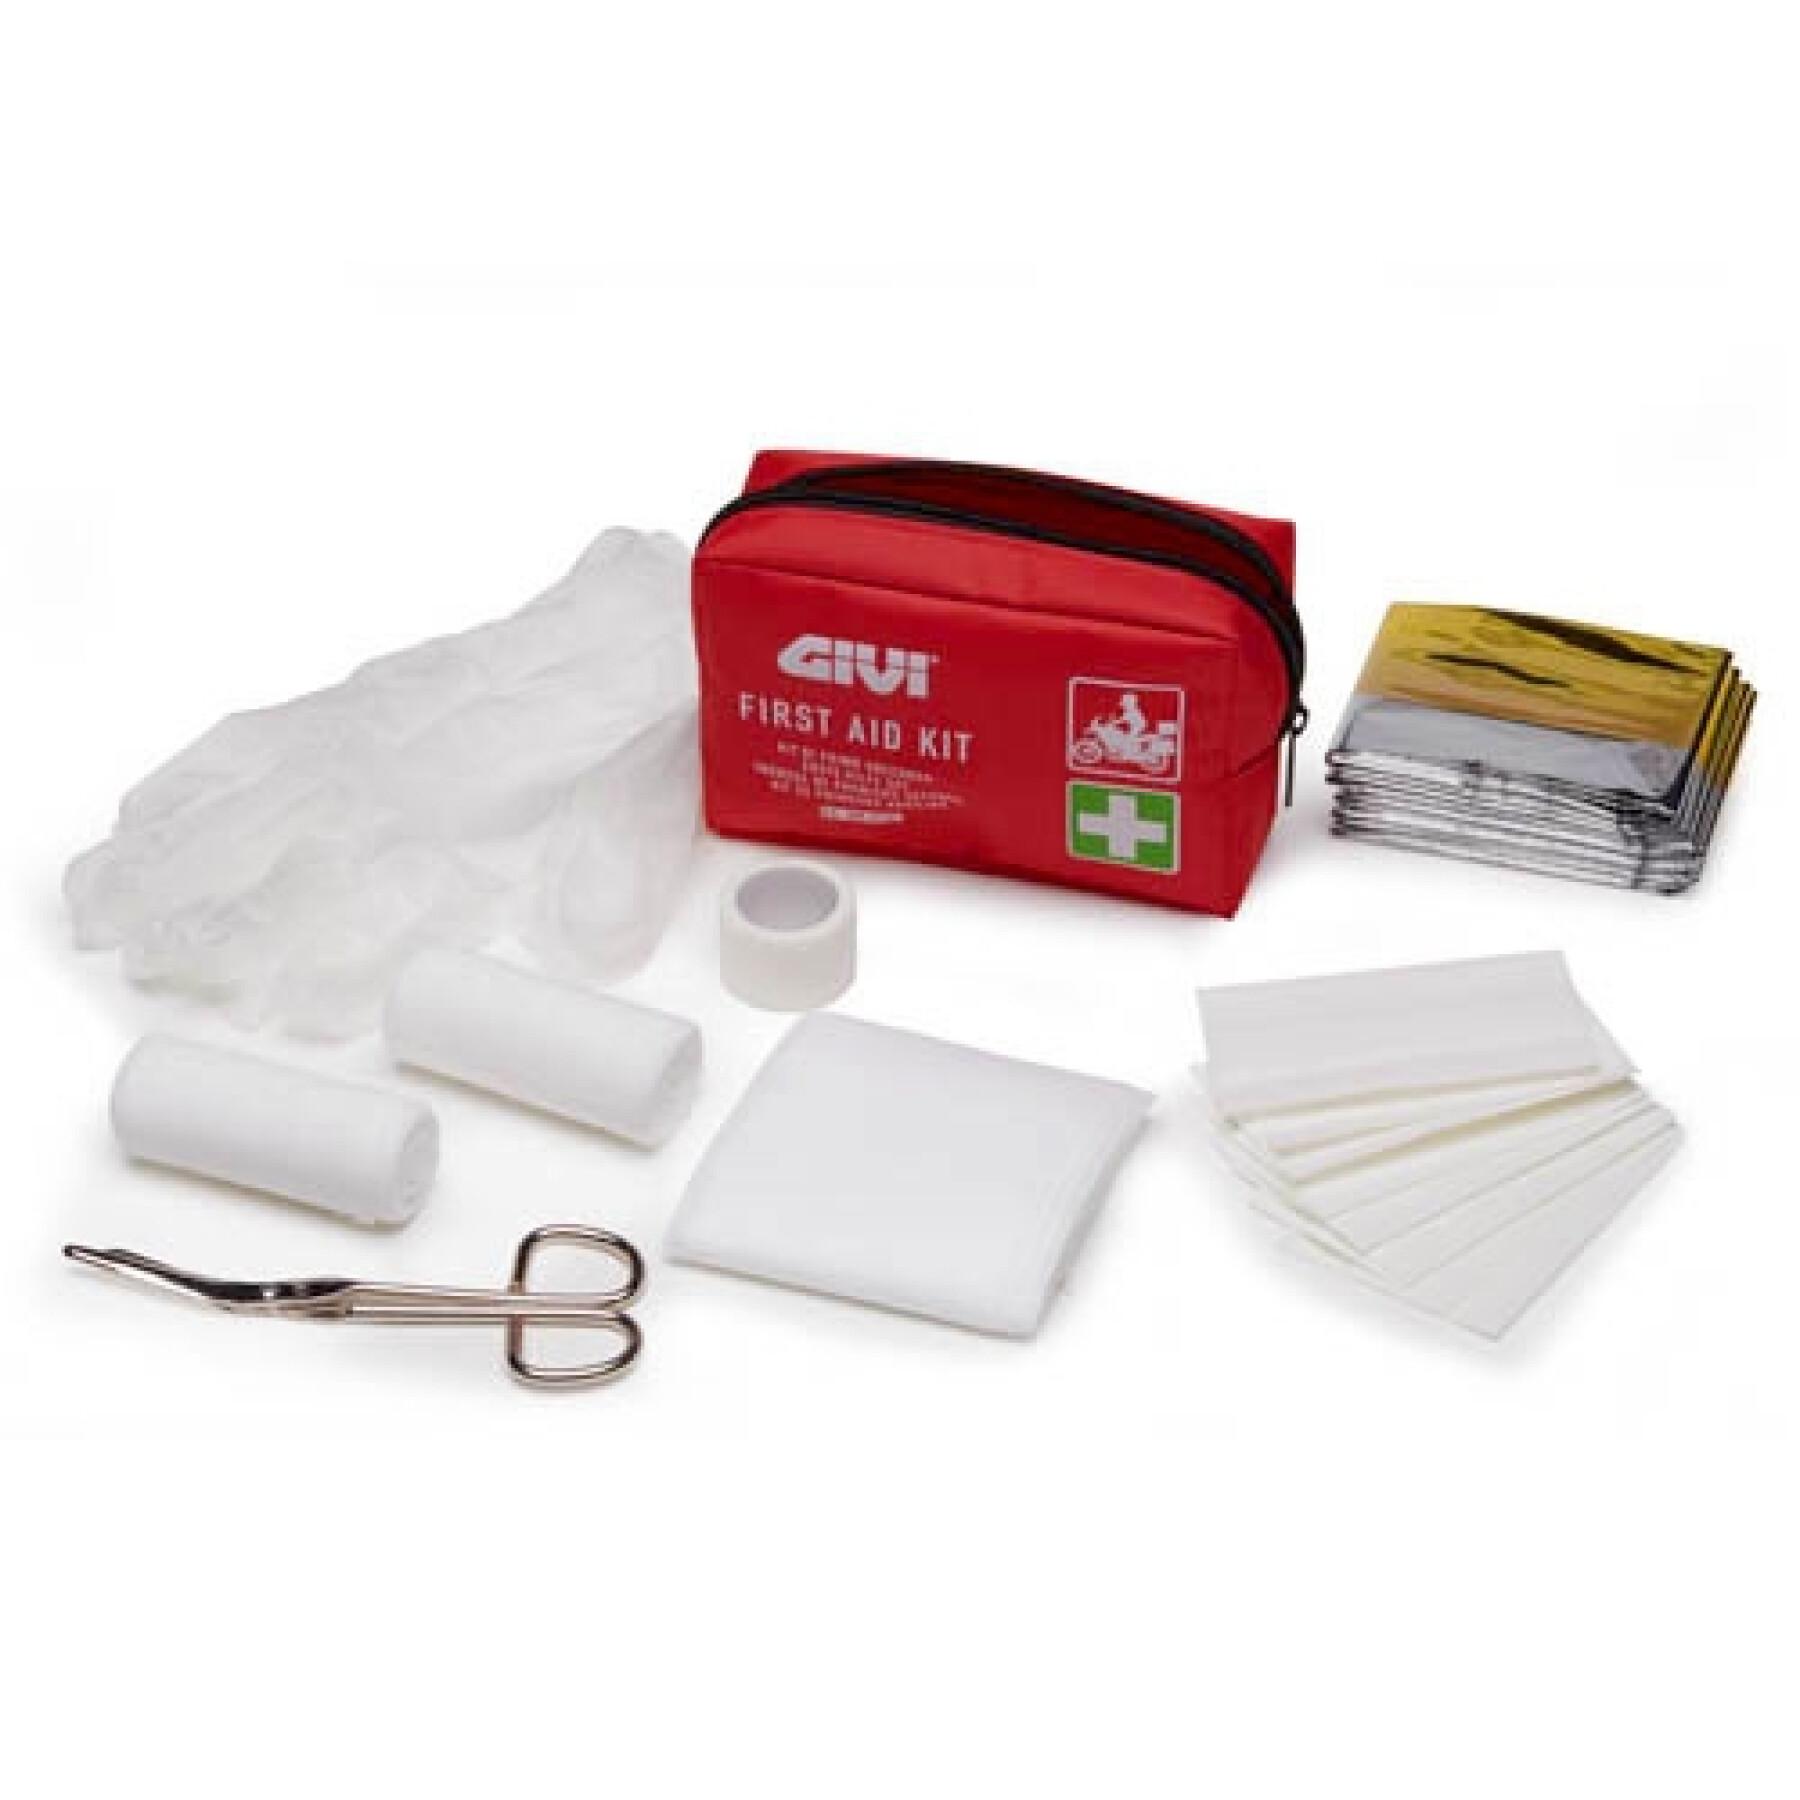 First aid kit s301 Givi